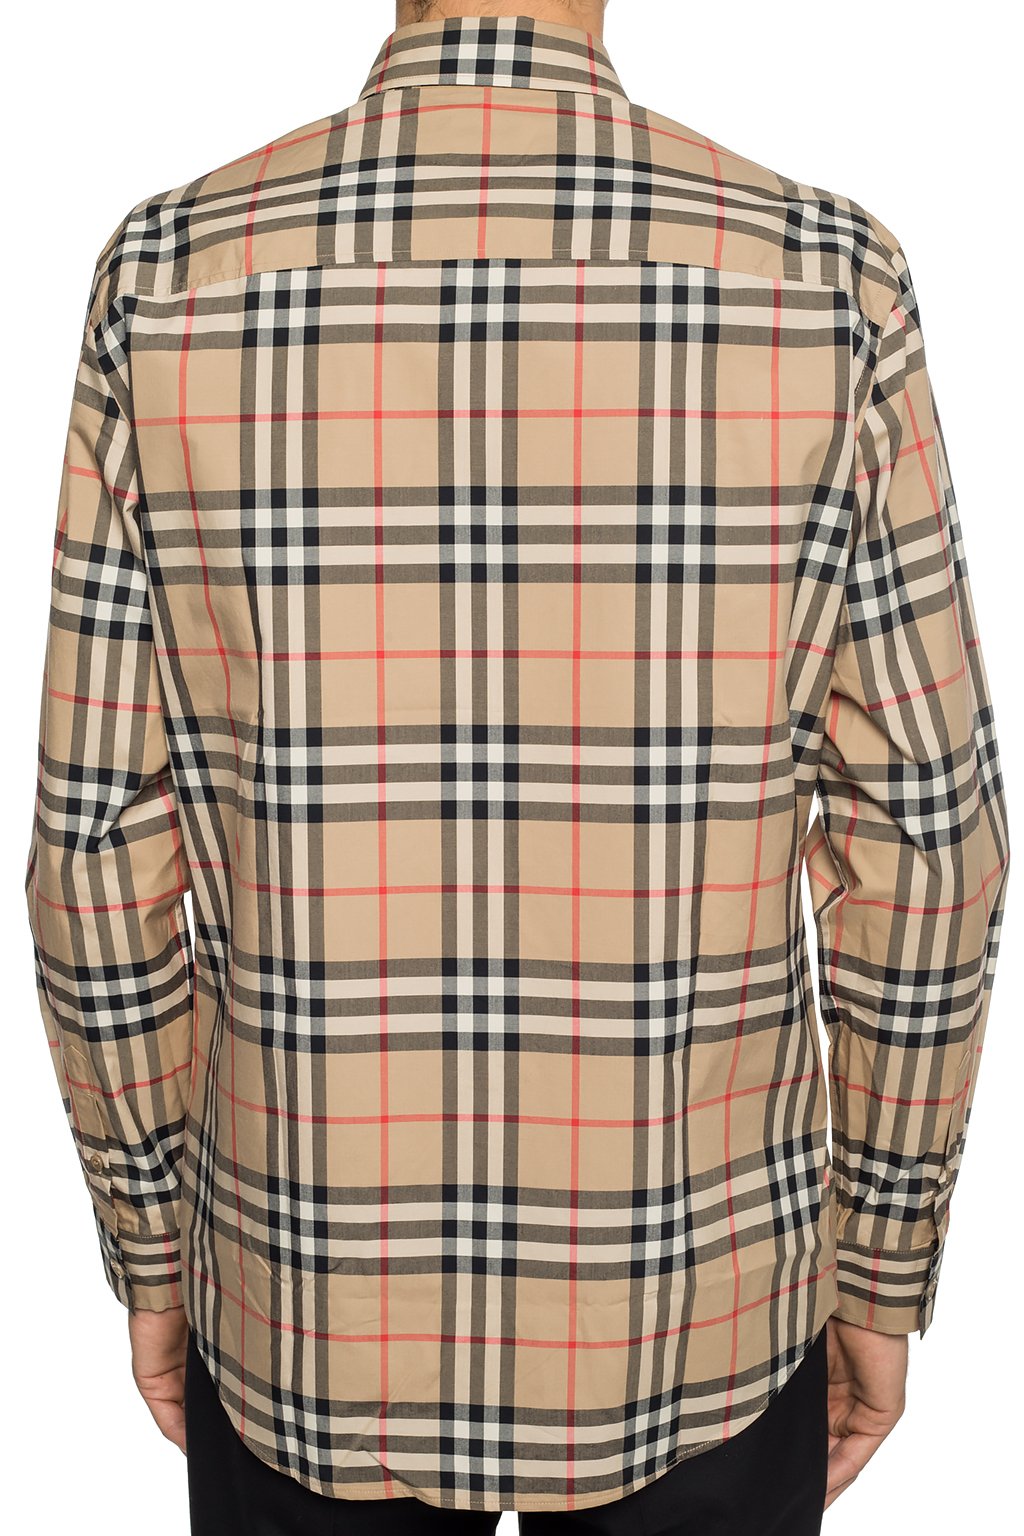 Burberry Shirts - How to Wear Burberry Shirts, Chictopia